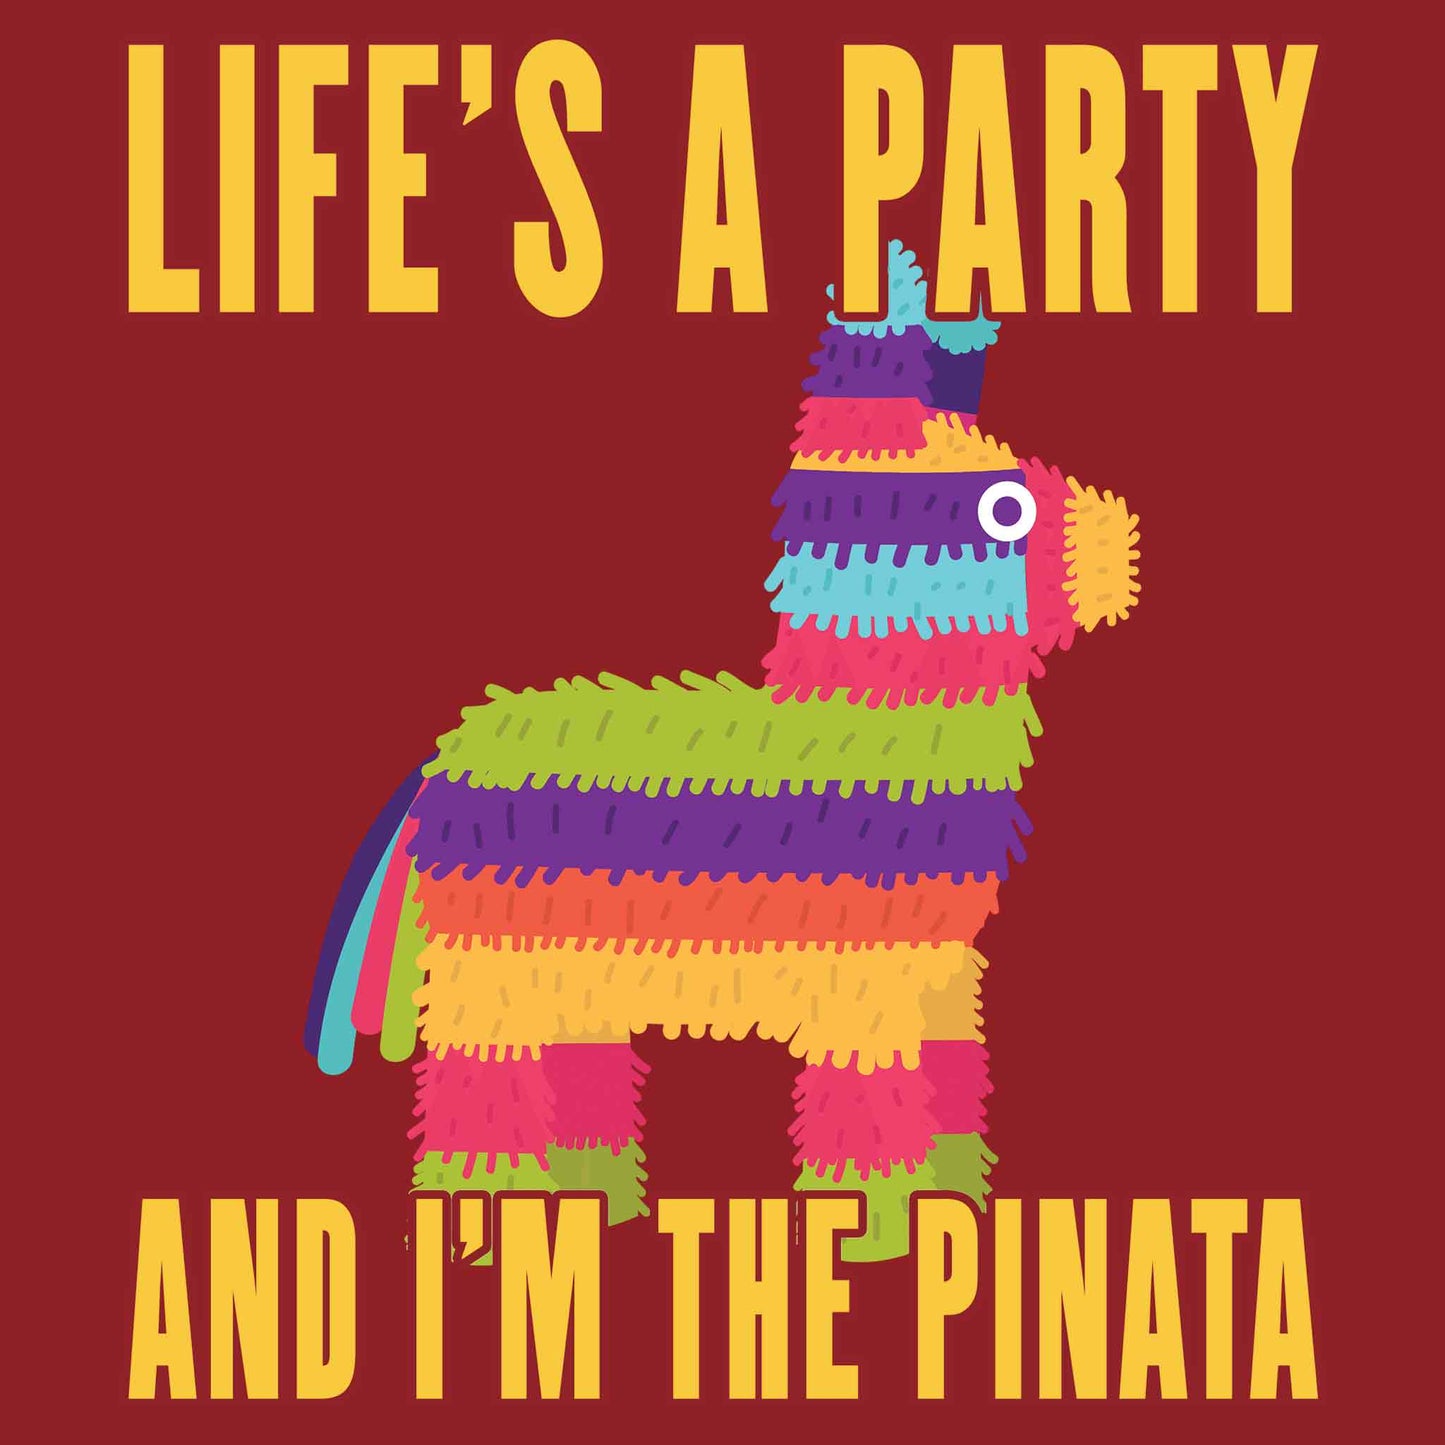 Life's A Party And I'm The Pinata T-Shirt